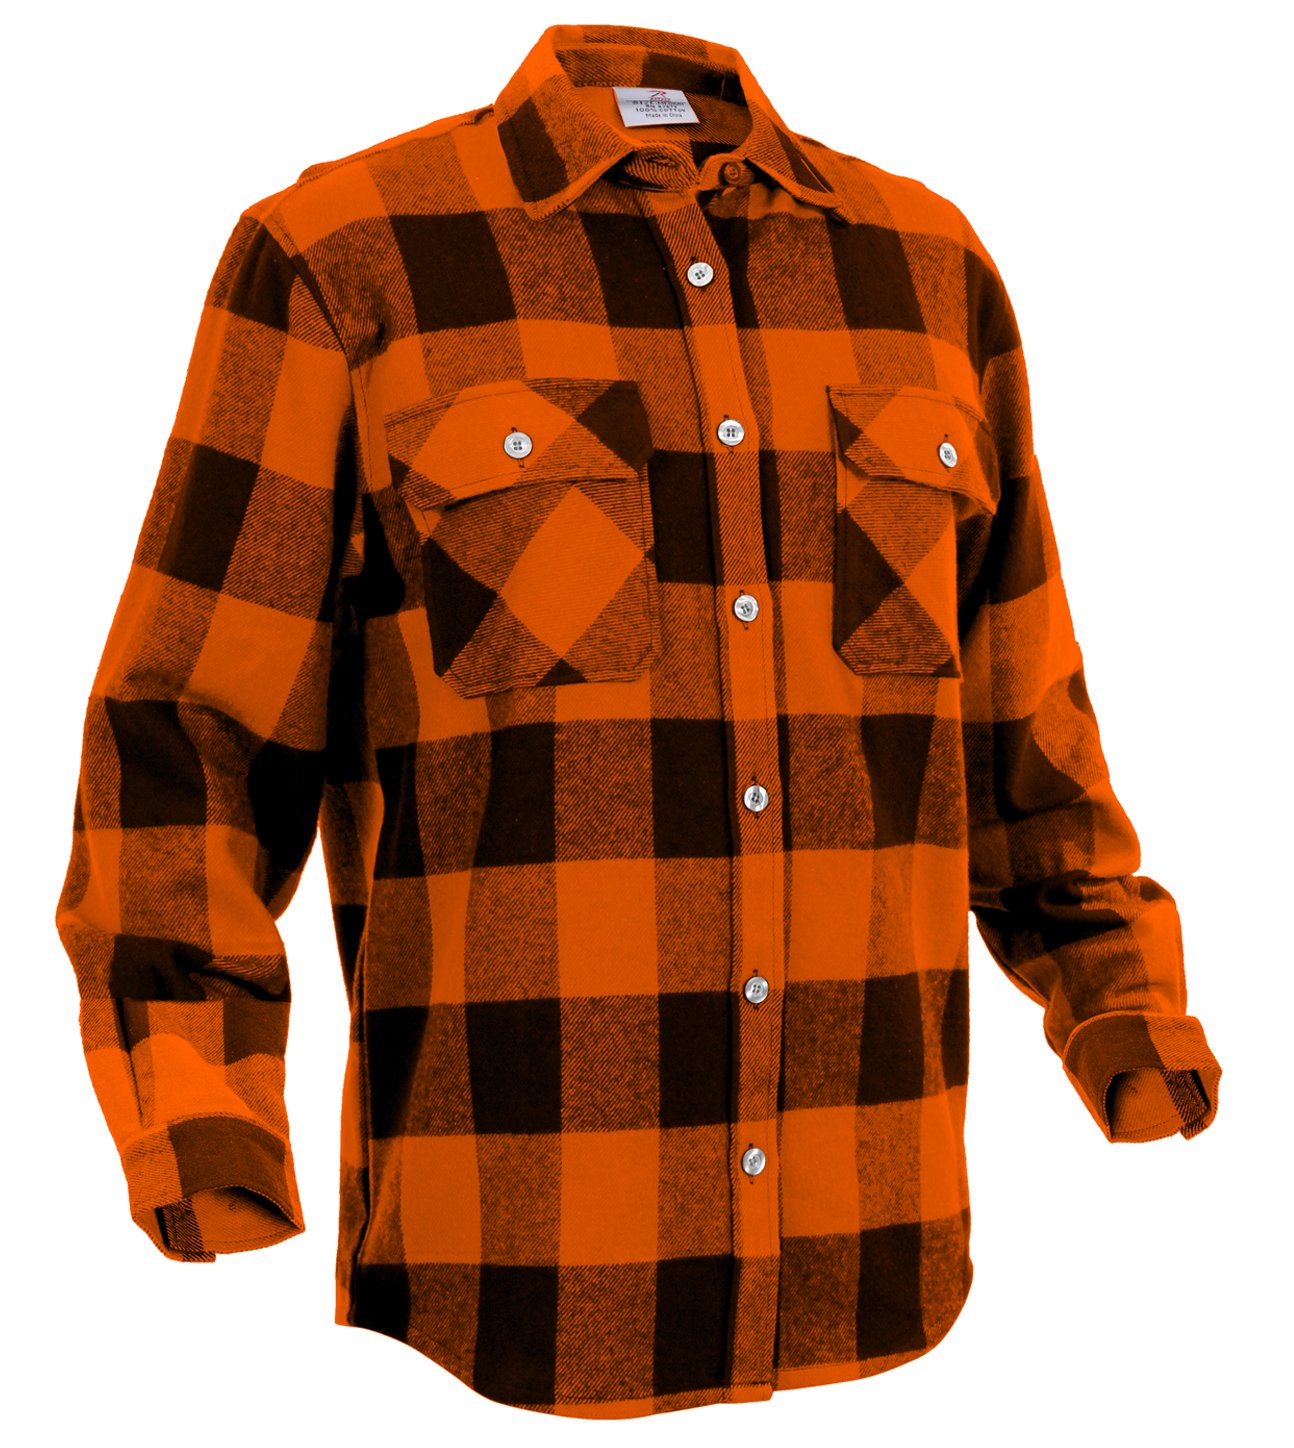 Rothco Buffalo Plaid Flannel Long Sleeve Shirt – Casual Button-Down with Heavyweight 8-oz Cotton Material